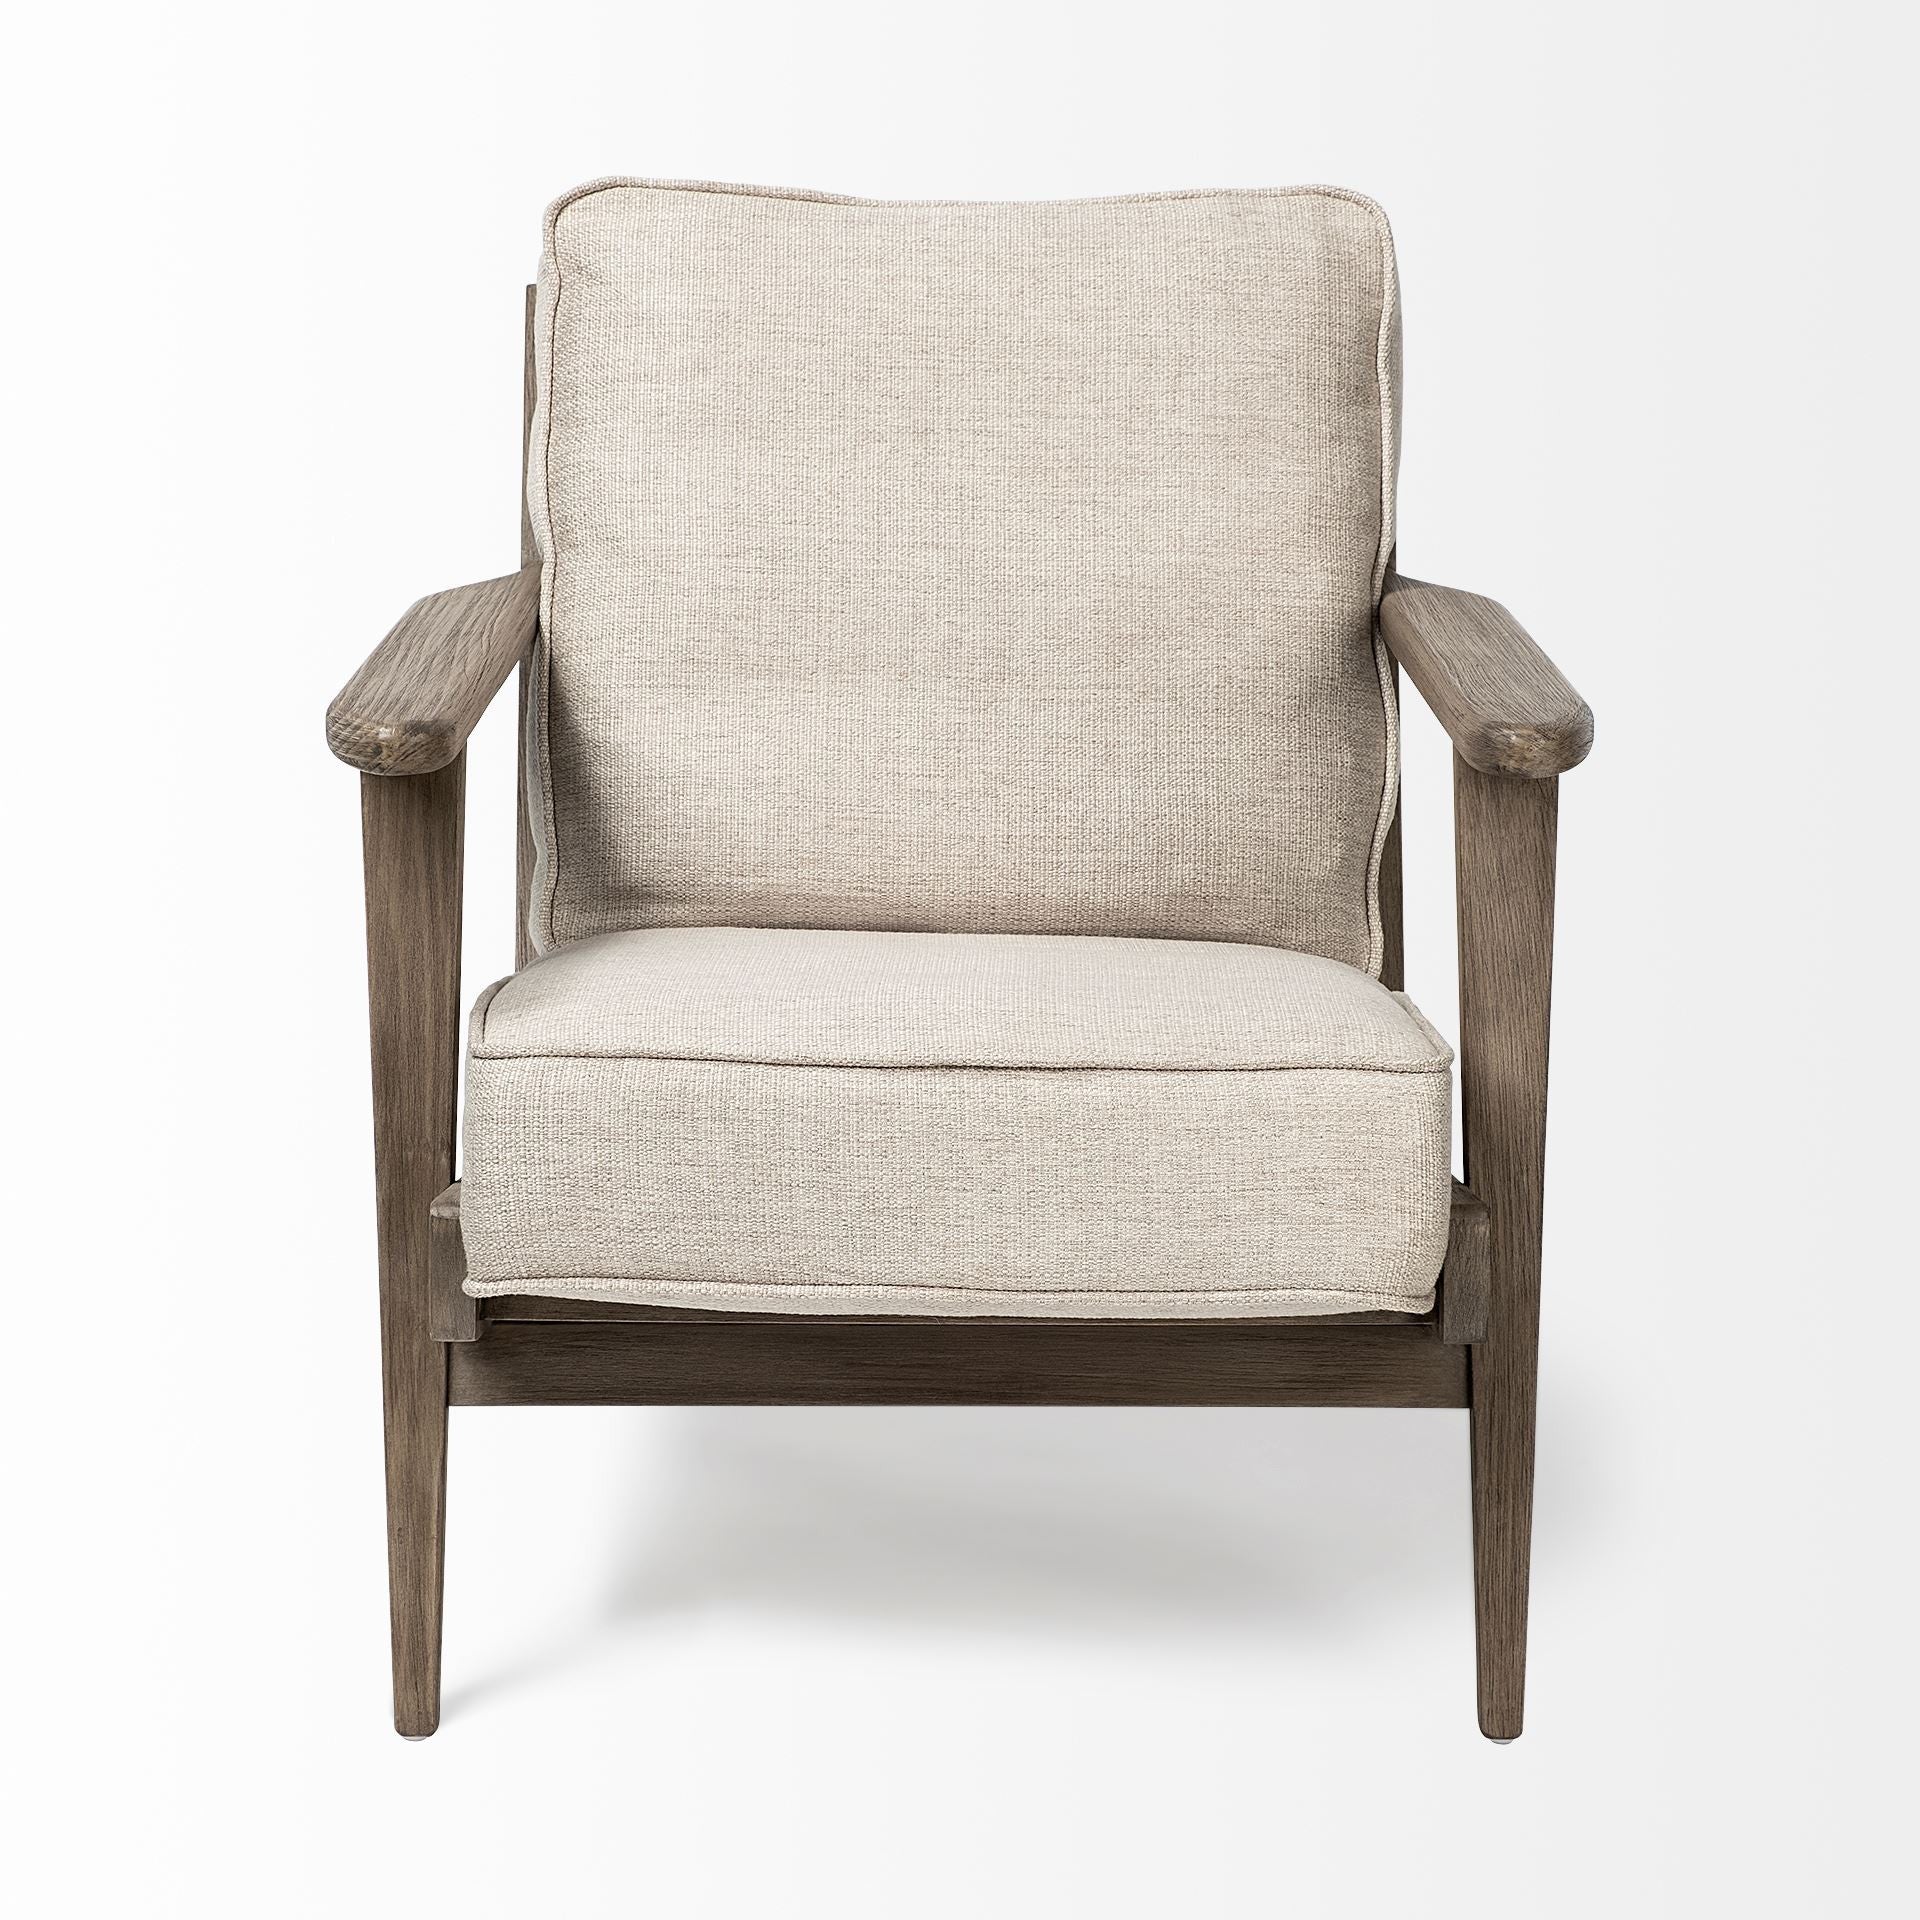 Cream Fabric Wrapped Accent Chair With Wooden Frame